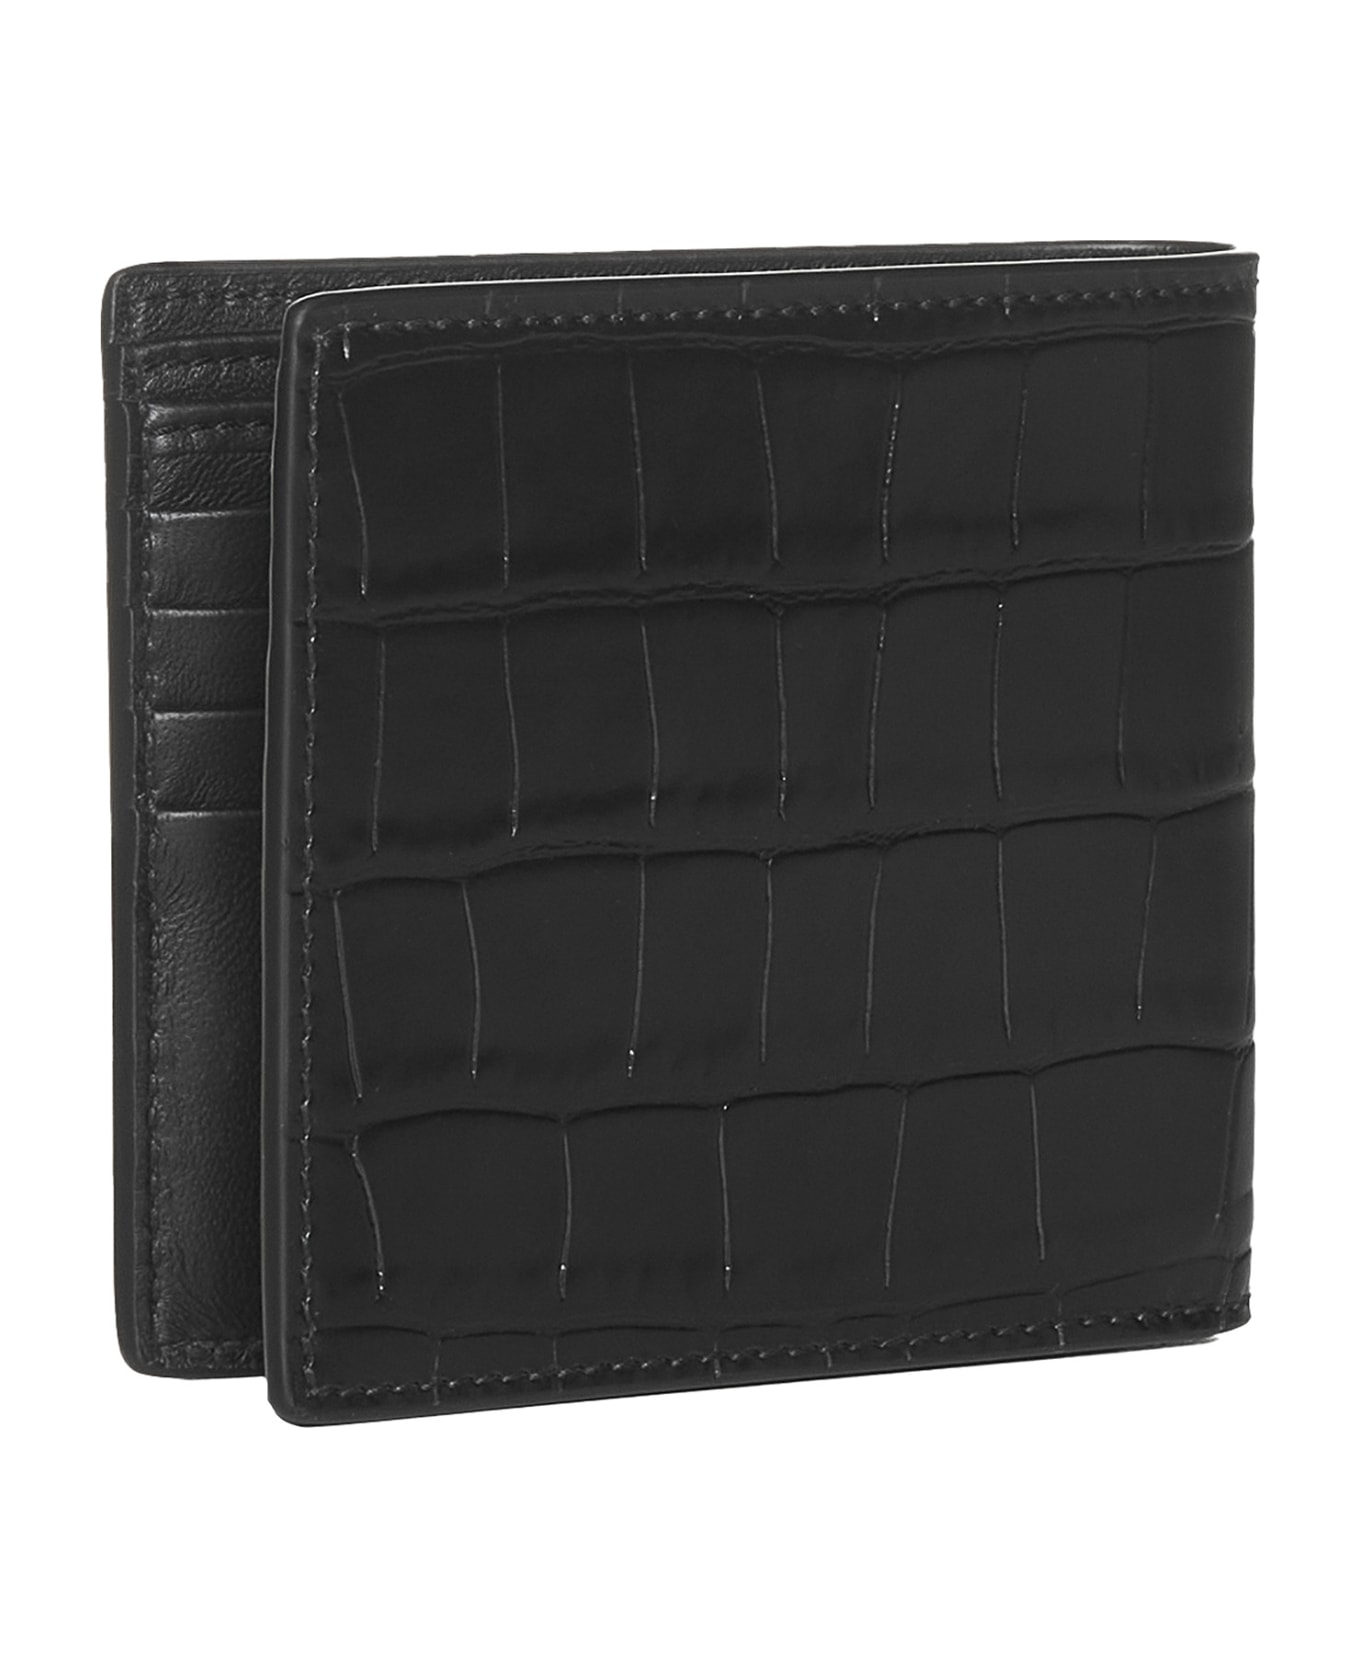 Alexander McQueen Bi-fold Wallet With Mini Skull Patch In Croco Embossed Leather - Nero